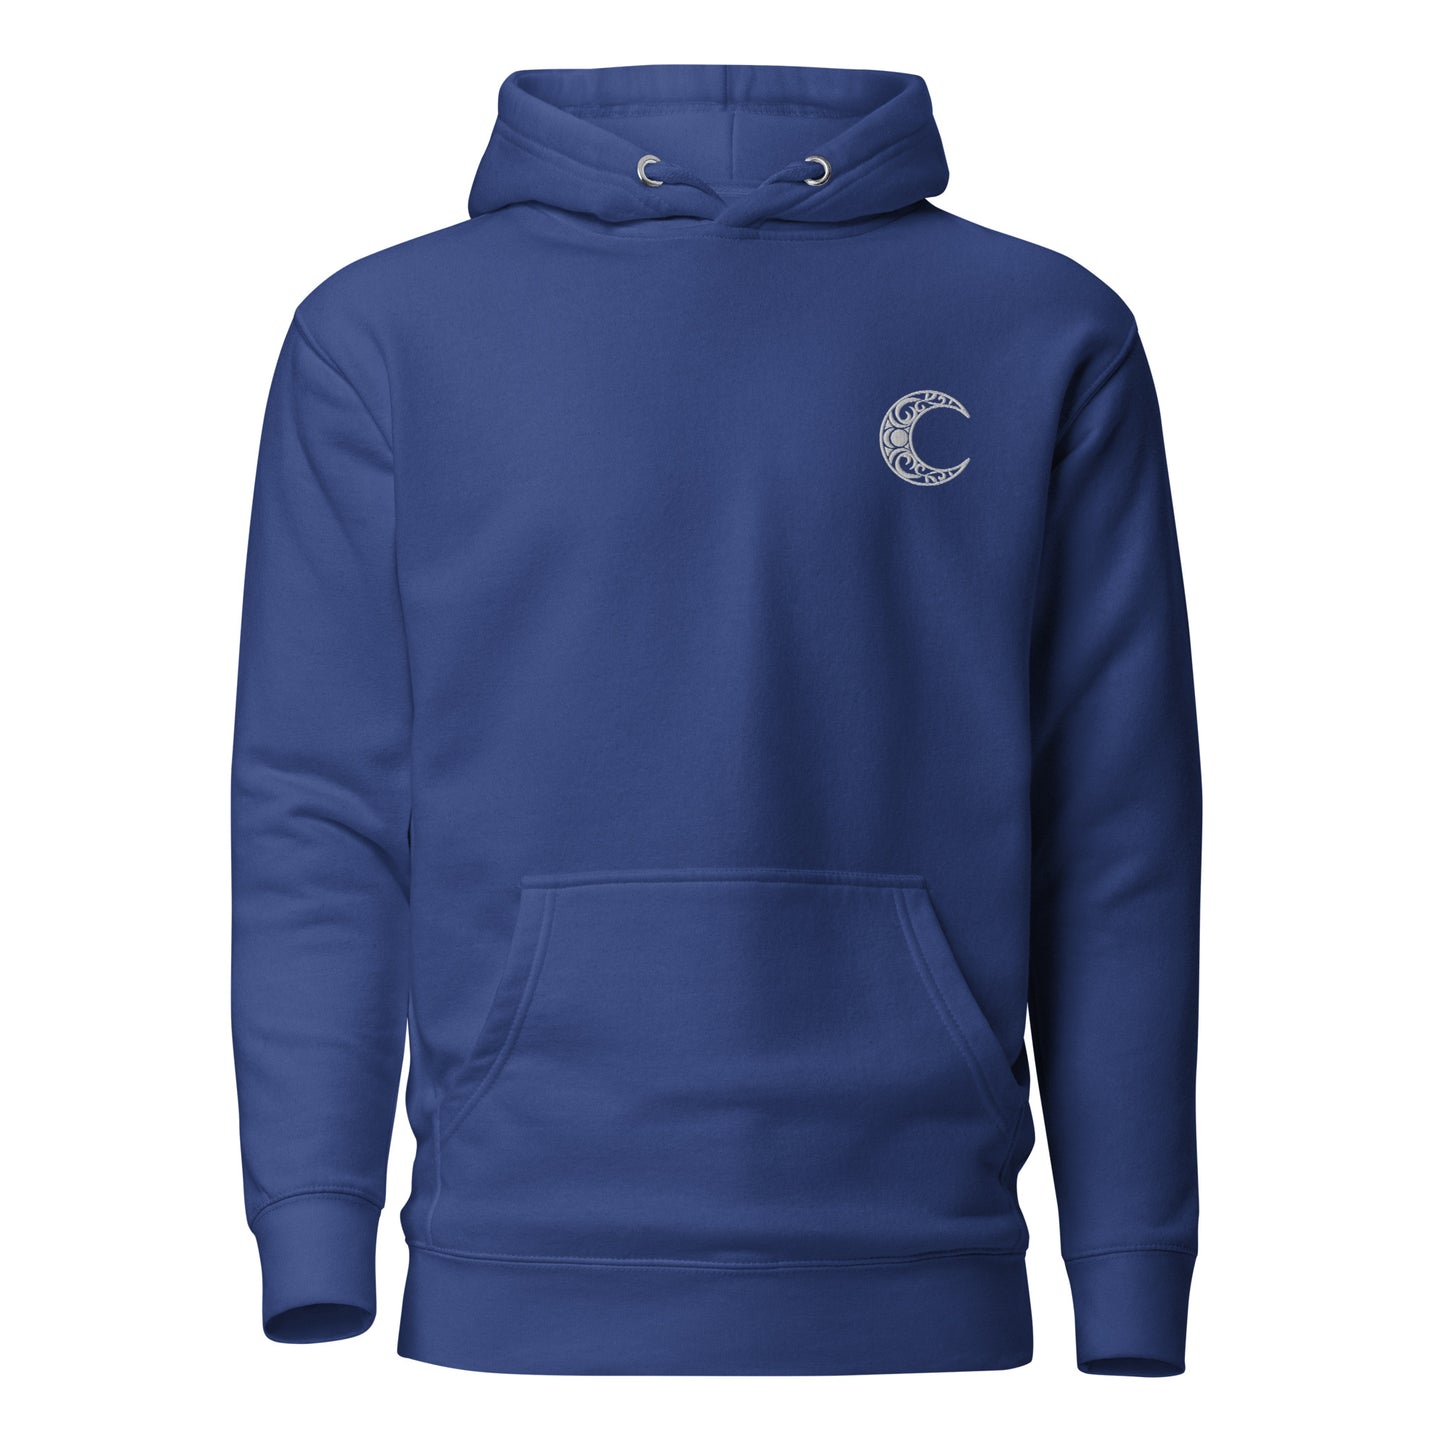 Damerian Elven Moon, Embroidered - 1st Edition Limited - Unisex Hoodie